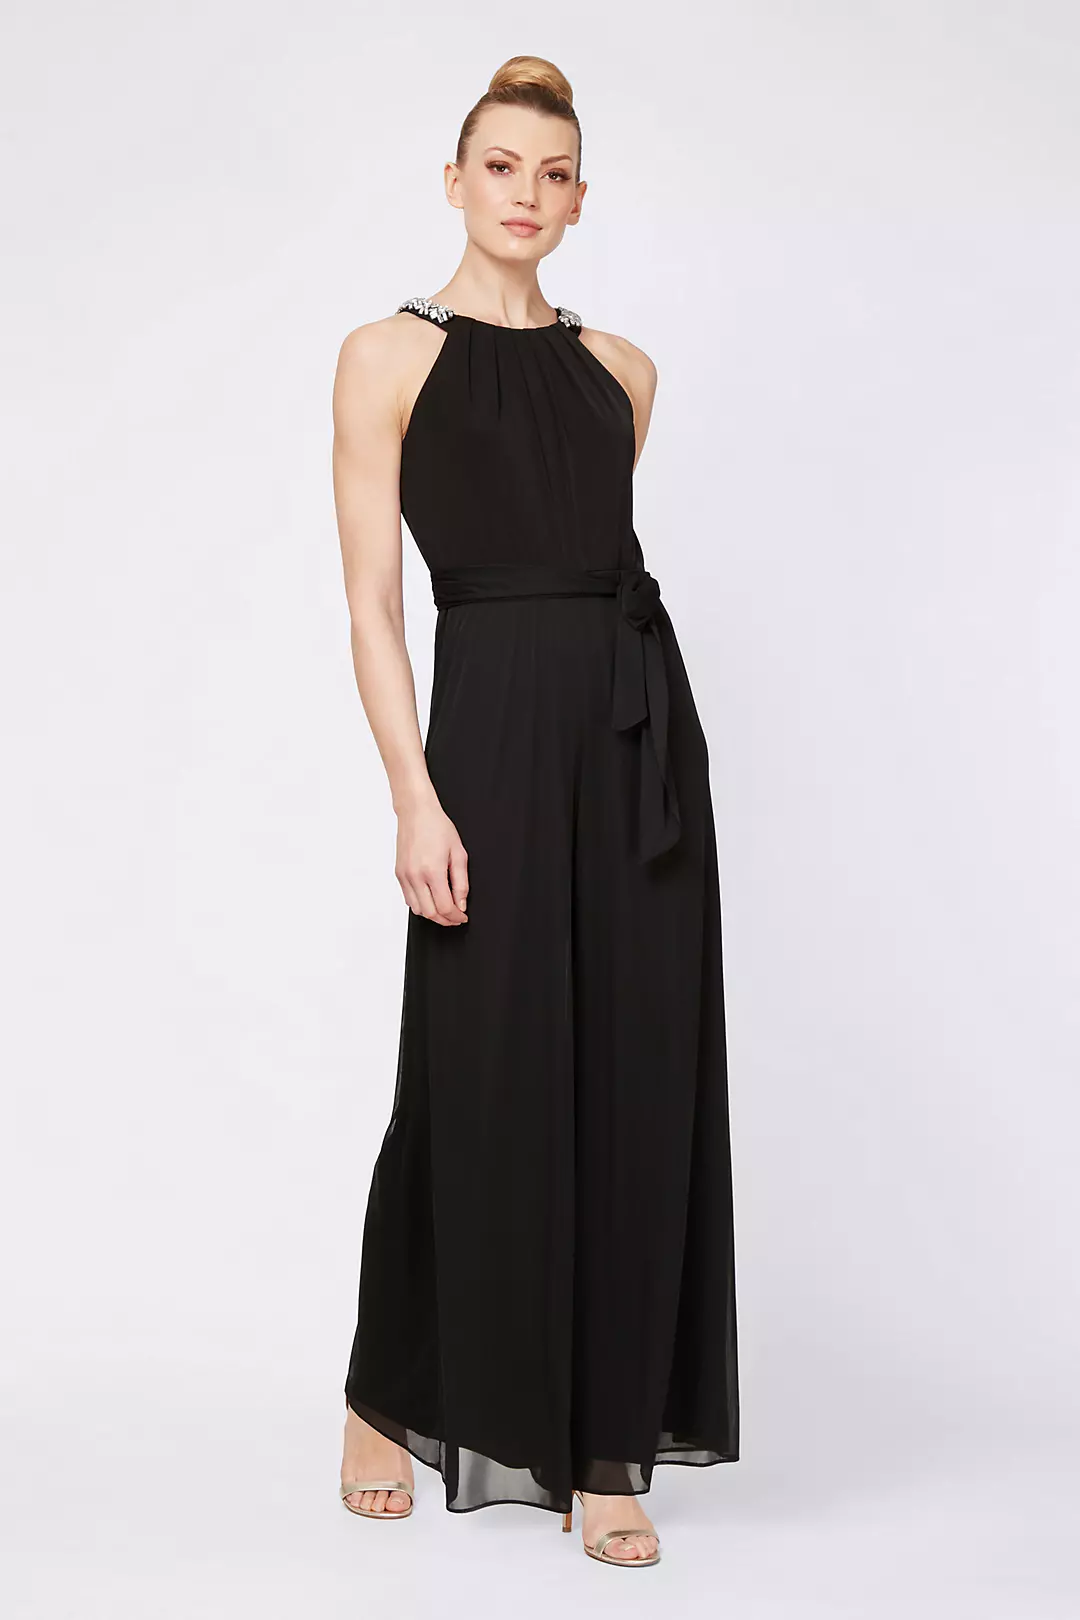 Chiffon Jumpsuit with Beaded Neckline and Sash Image